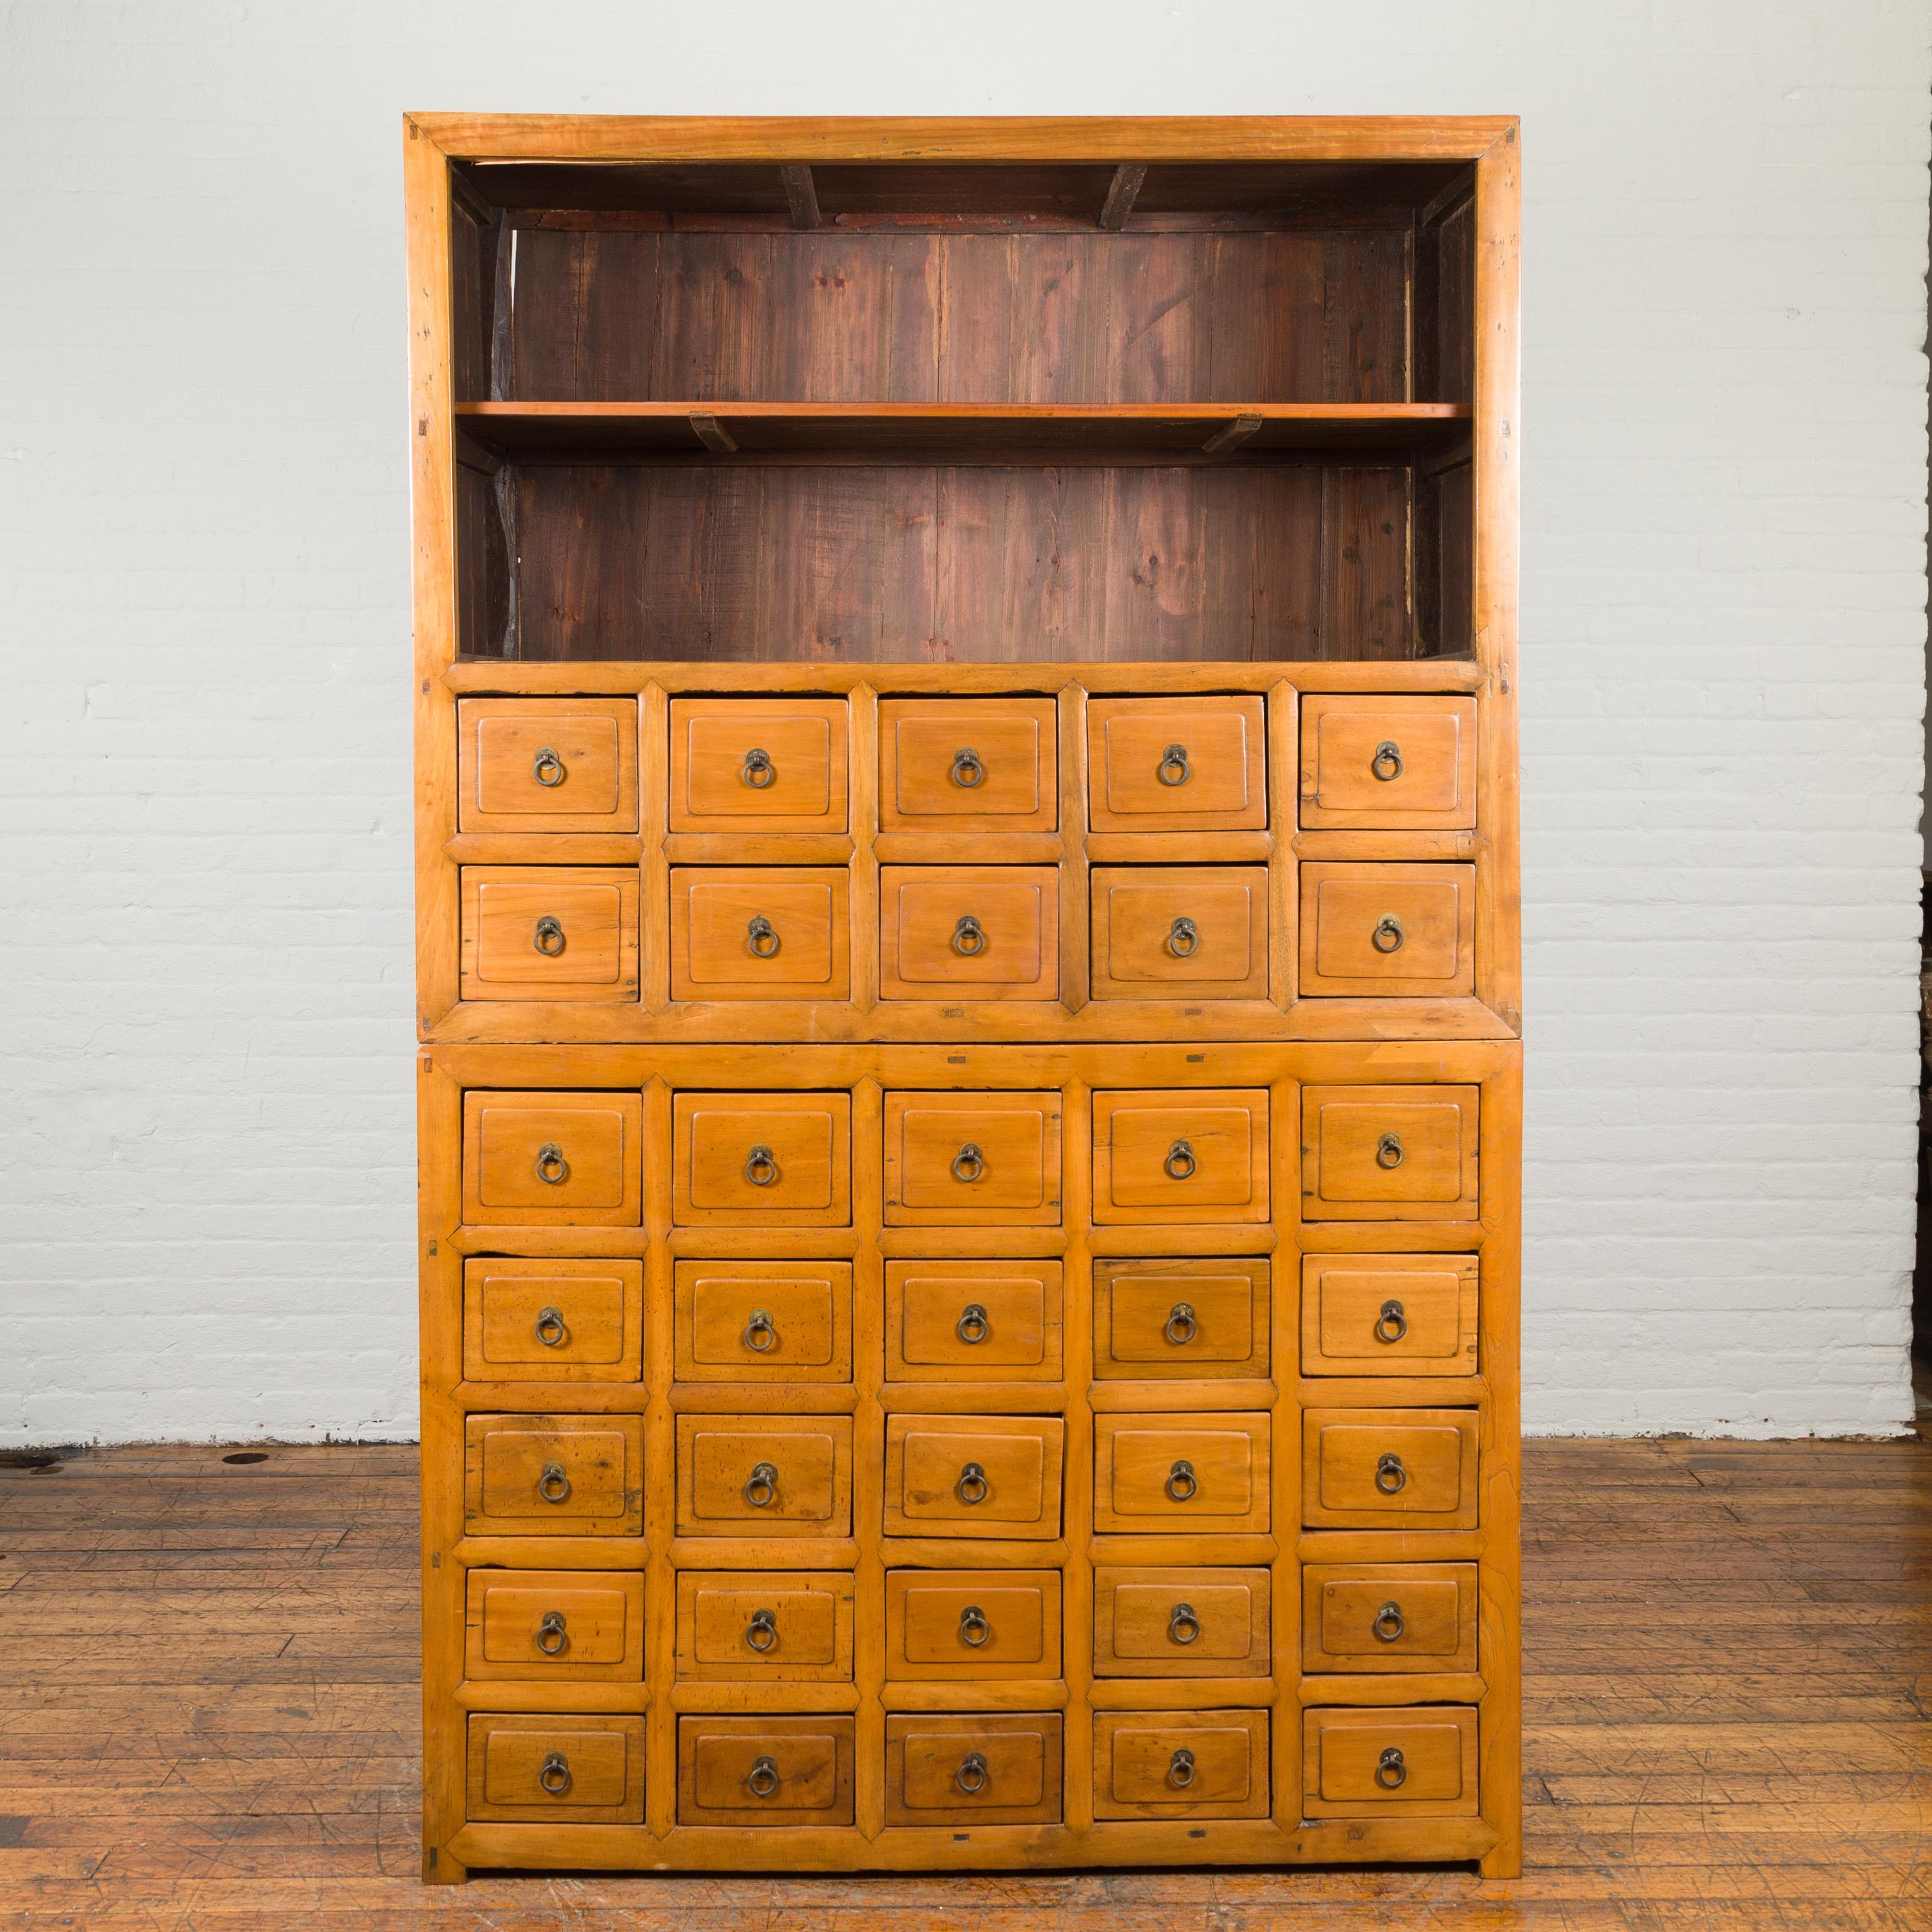 A Chinese Qing Dynasty period late 19th century apothecary merchant's cabinet made in two parts of nam wood (a variety of cedar) with shelves and multiple drawers. Created in China during the Qing Dynasty period, this cabinet features 35 drawers